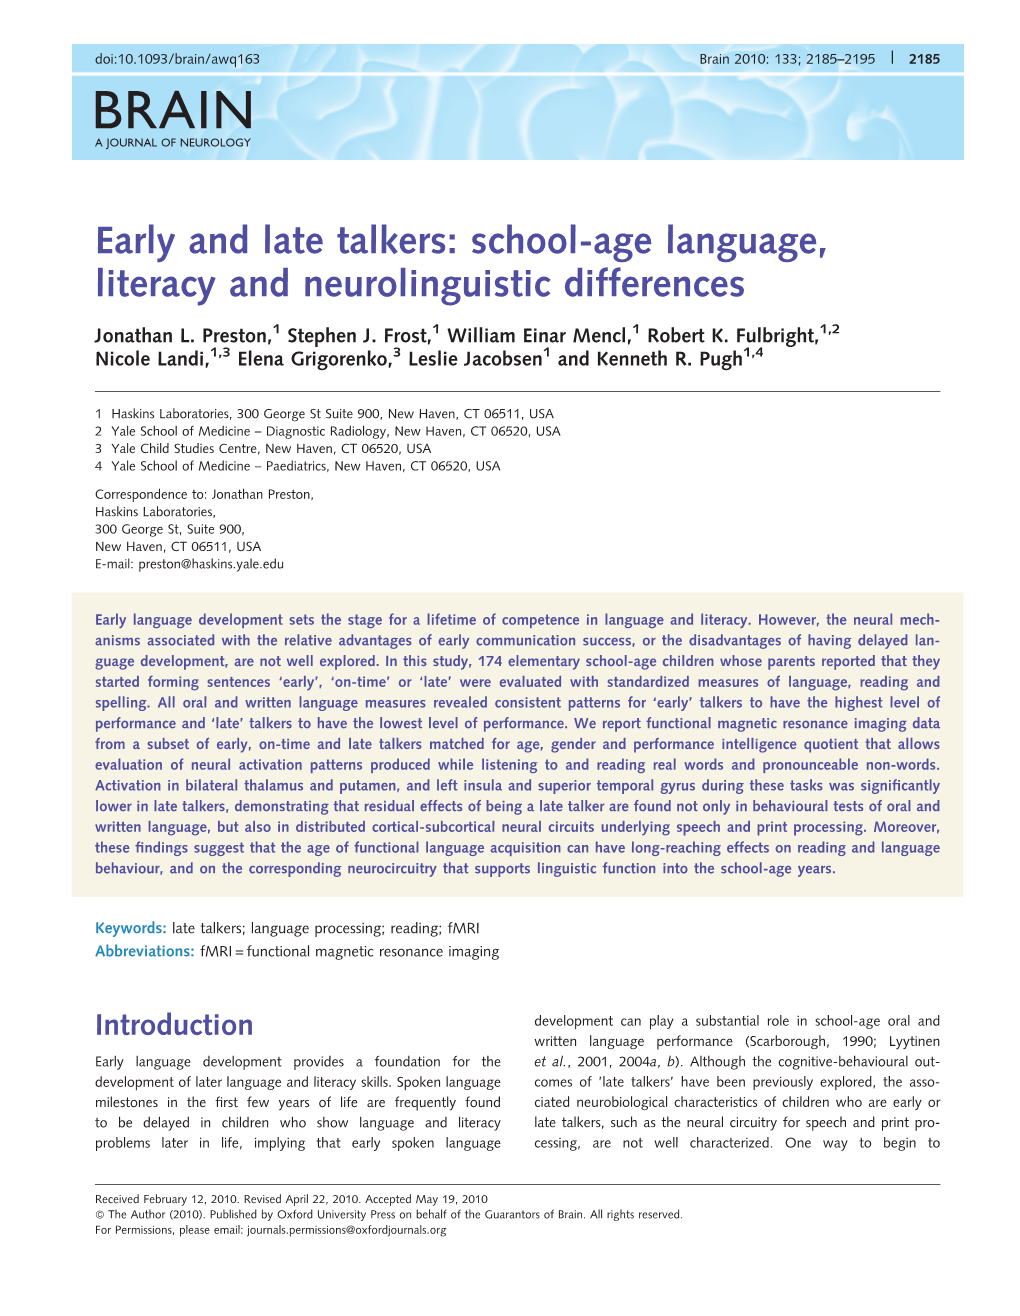 Early and Late Talkers: School-Age Language, Literacy and Neurolinguistic Differences